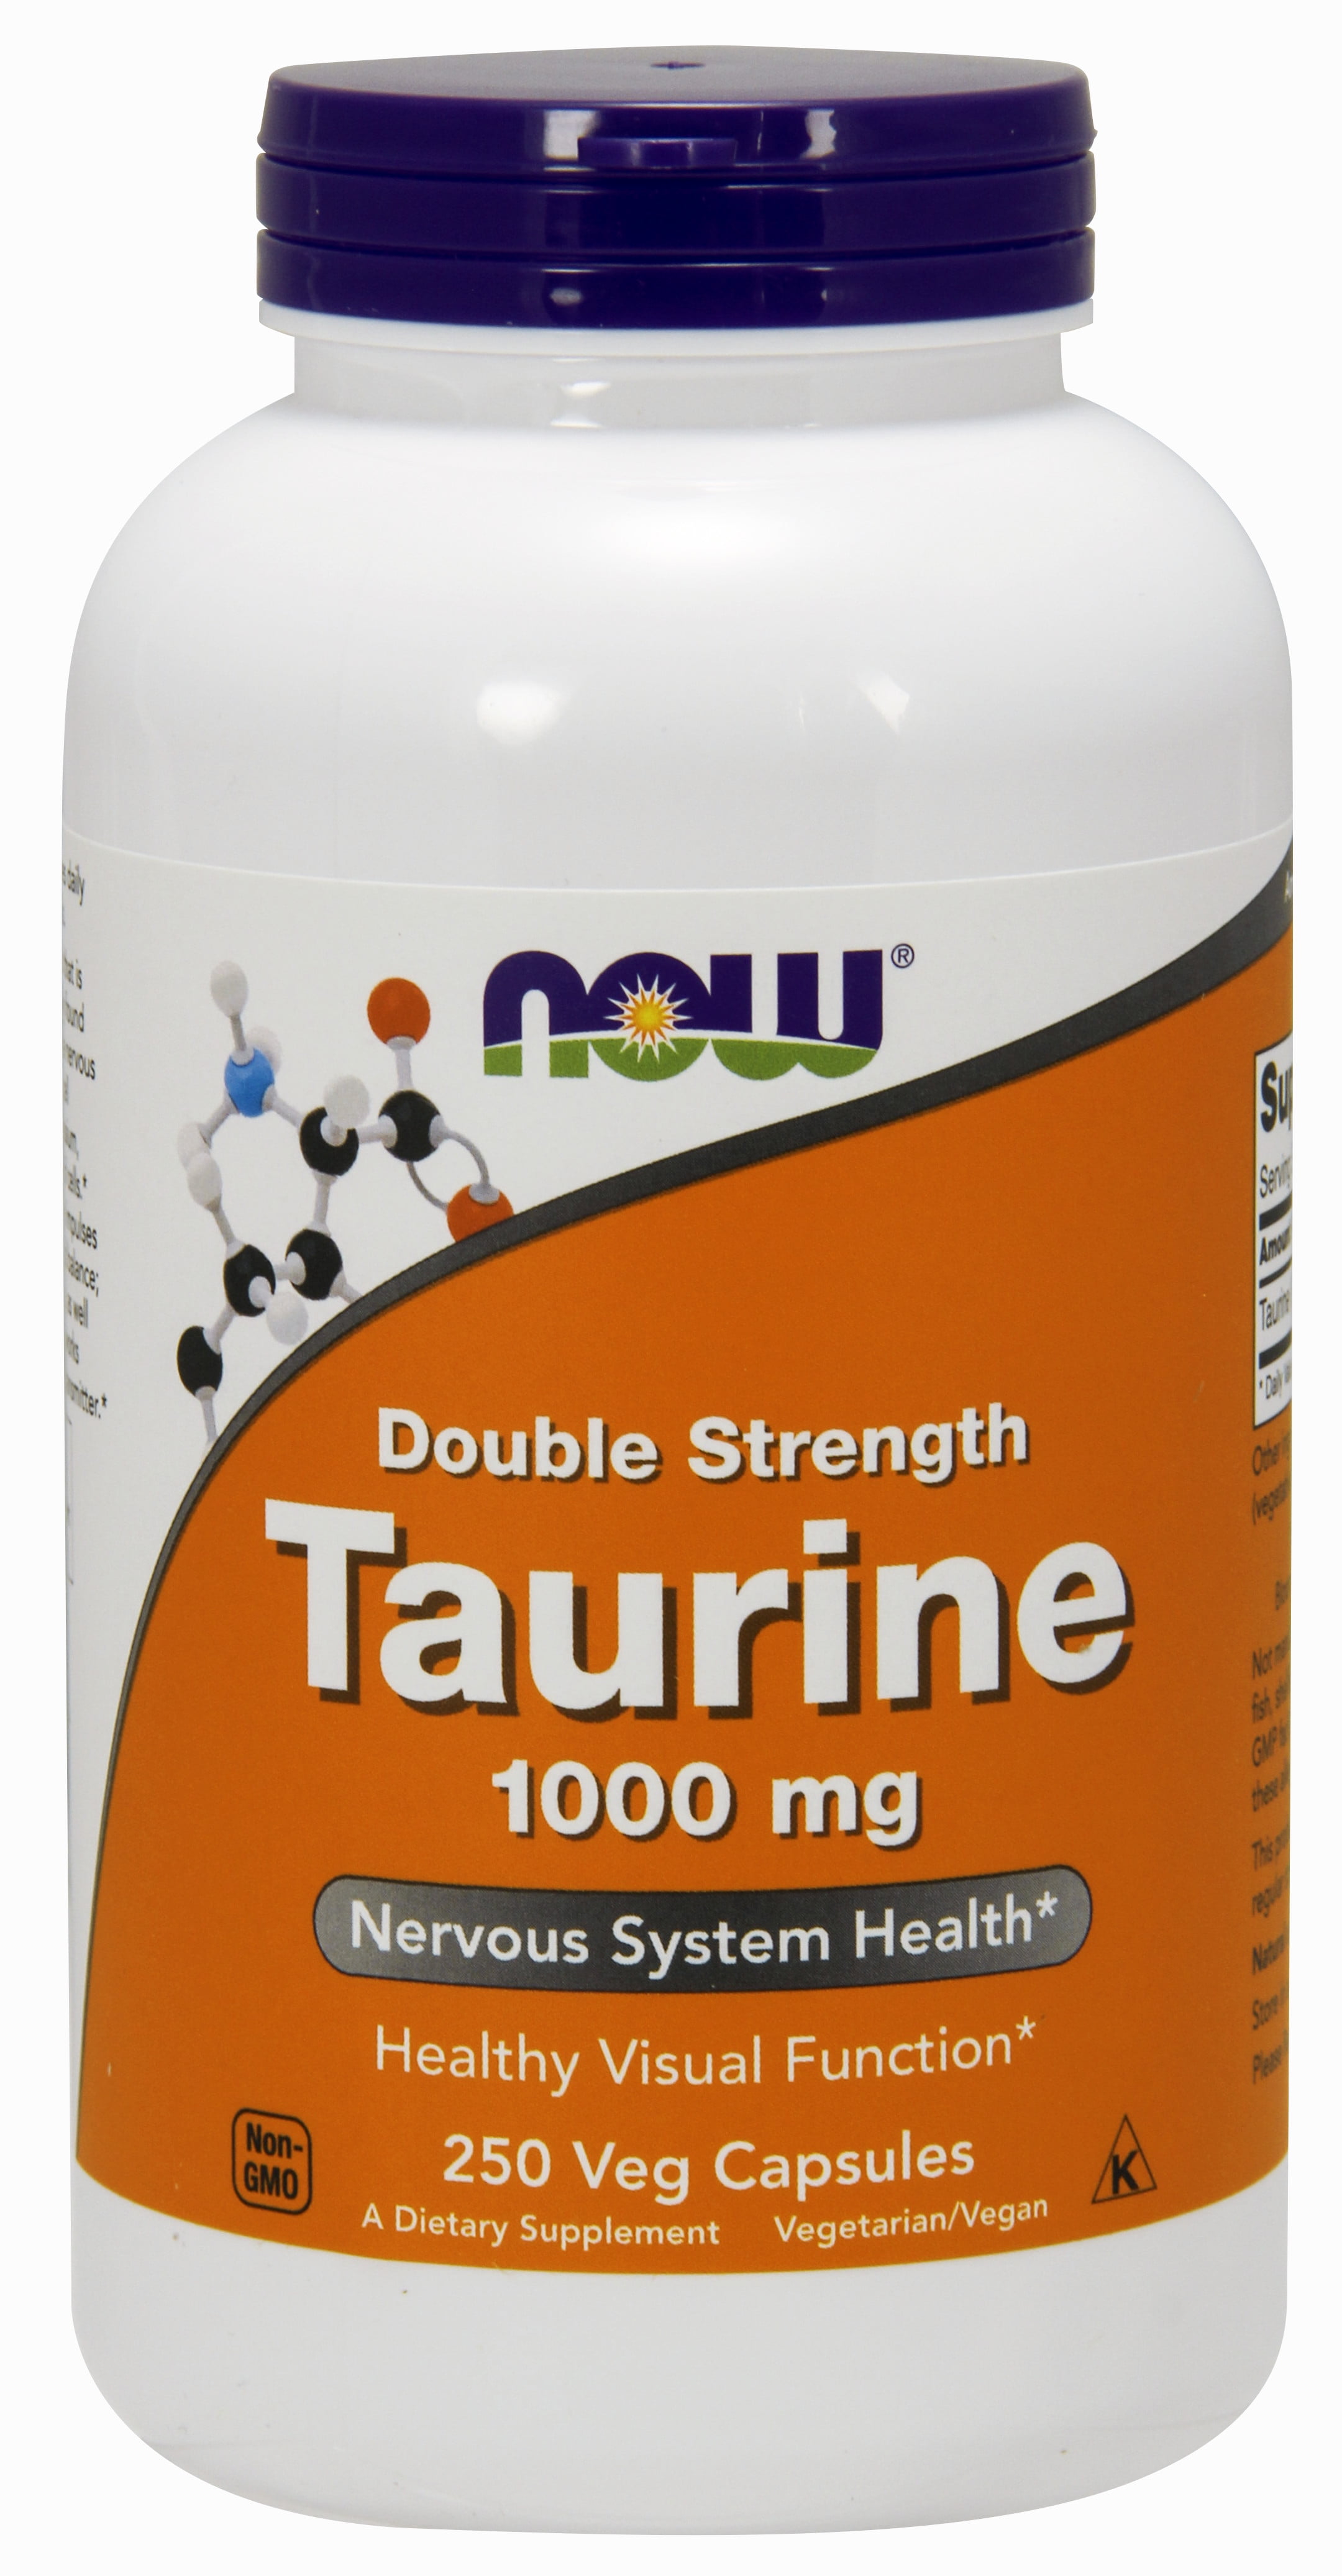 lung aerosols using taurine supplements for humans